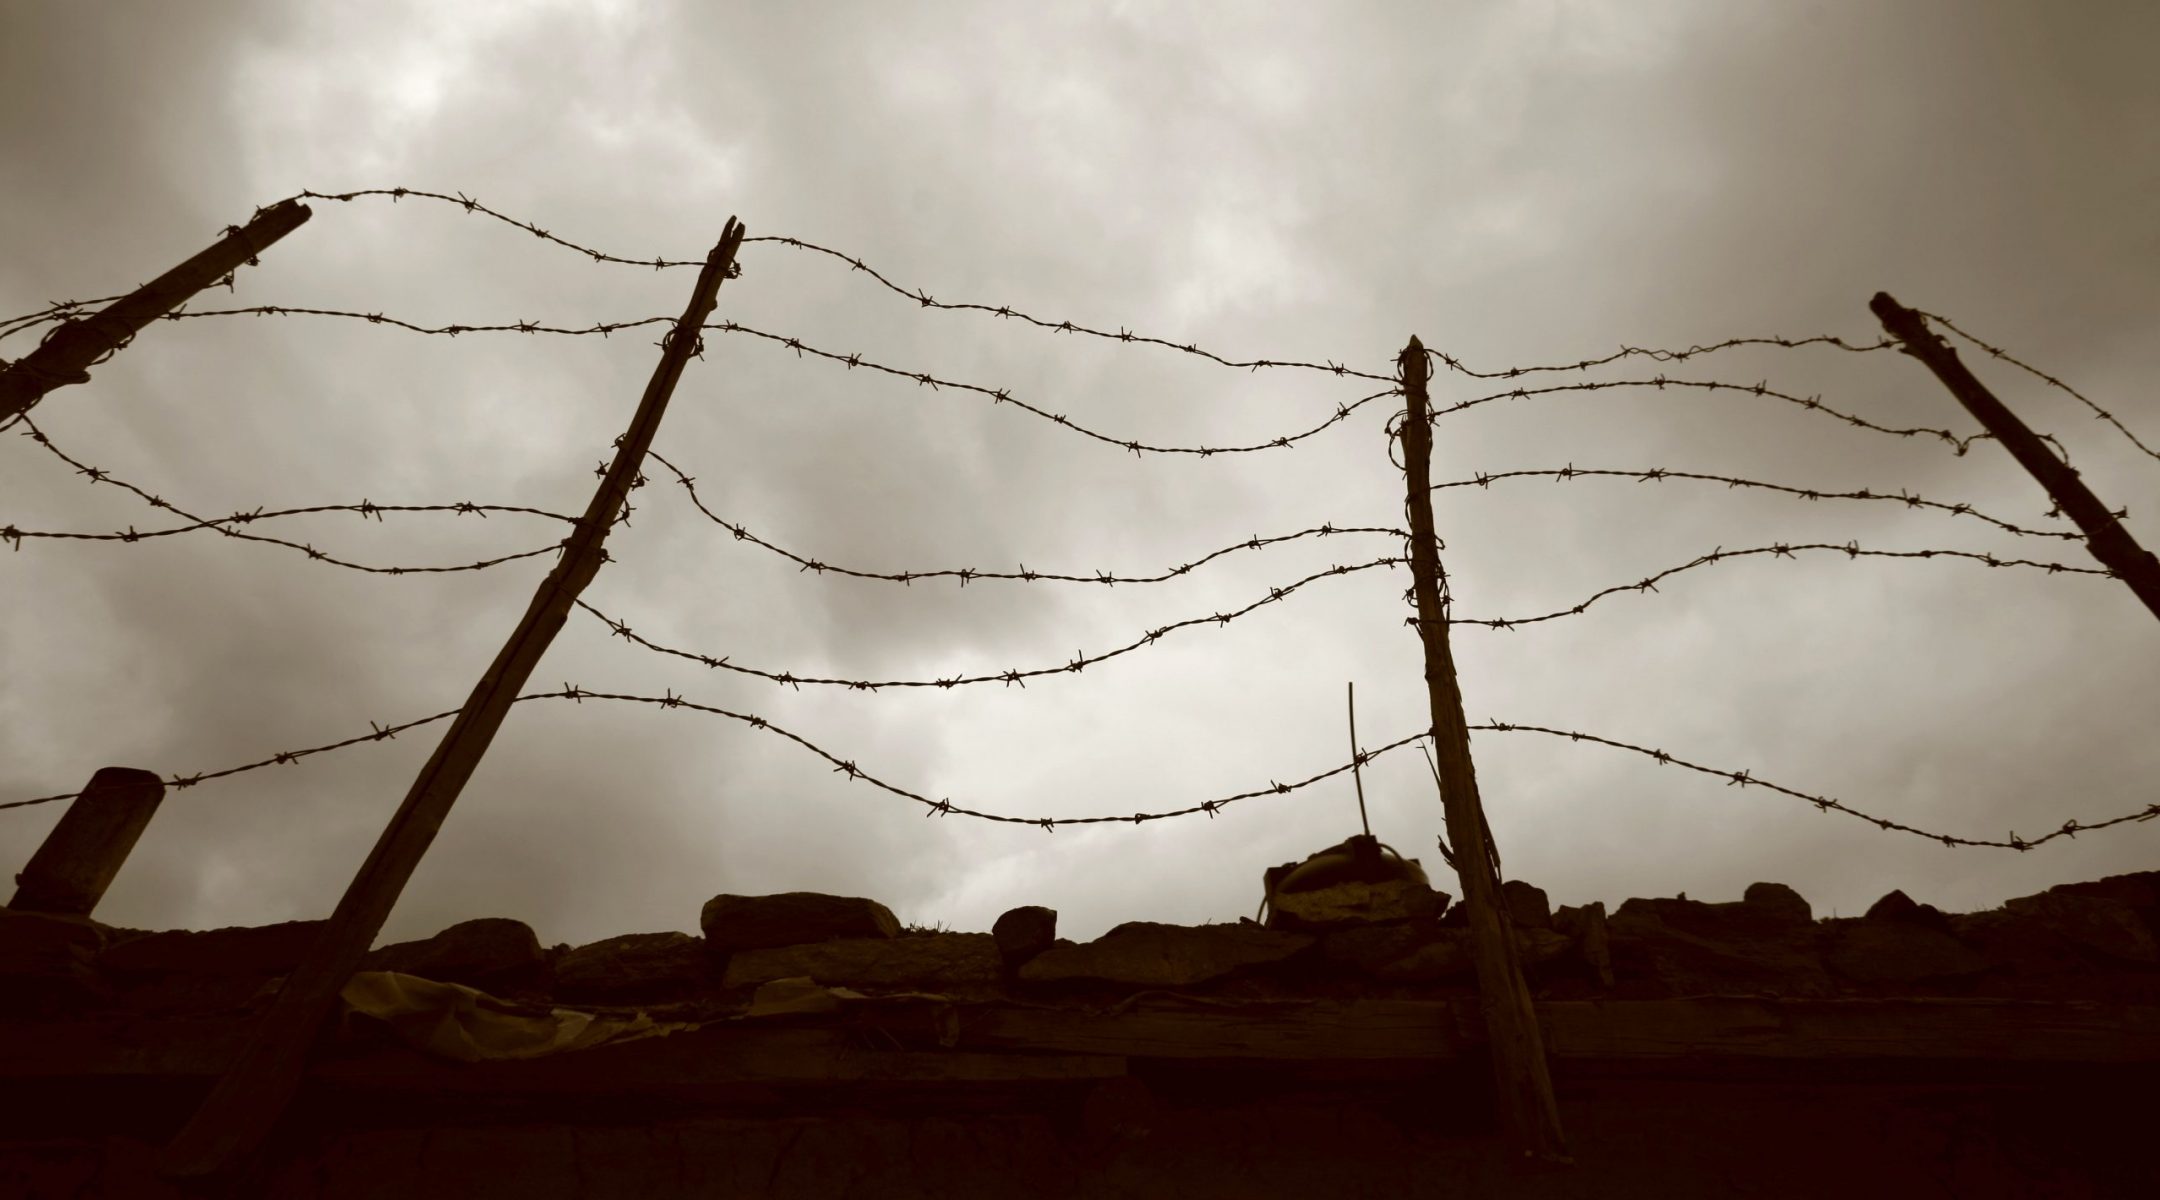 Barbed wire fence against a dark sky